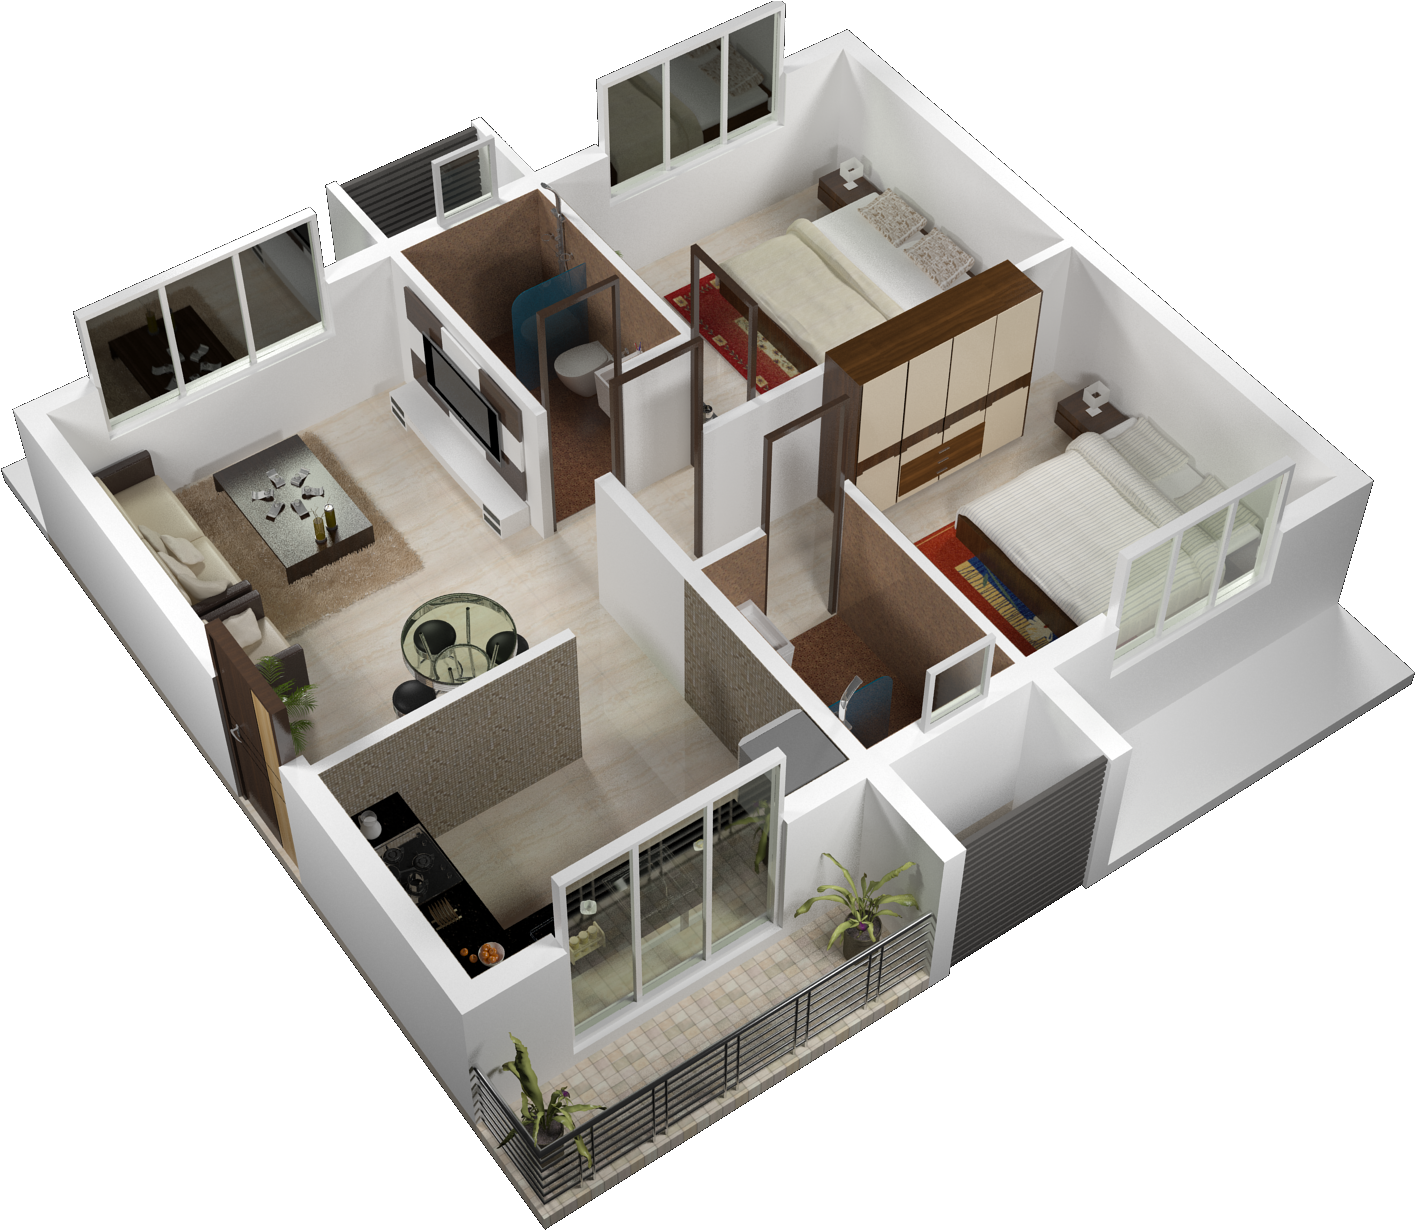 Staggering 3d House Plans In Chennai 10 600 Sq Ft Plan - Staggering 3d House Plans In Chennai 10 600 Sq Ft Plan (1470x1257)